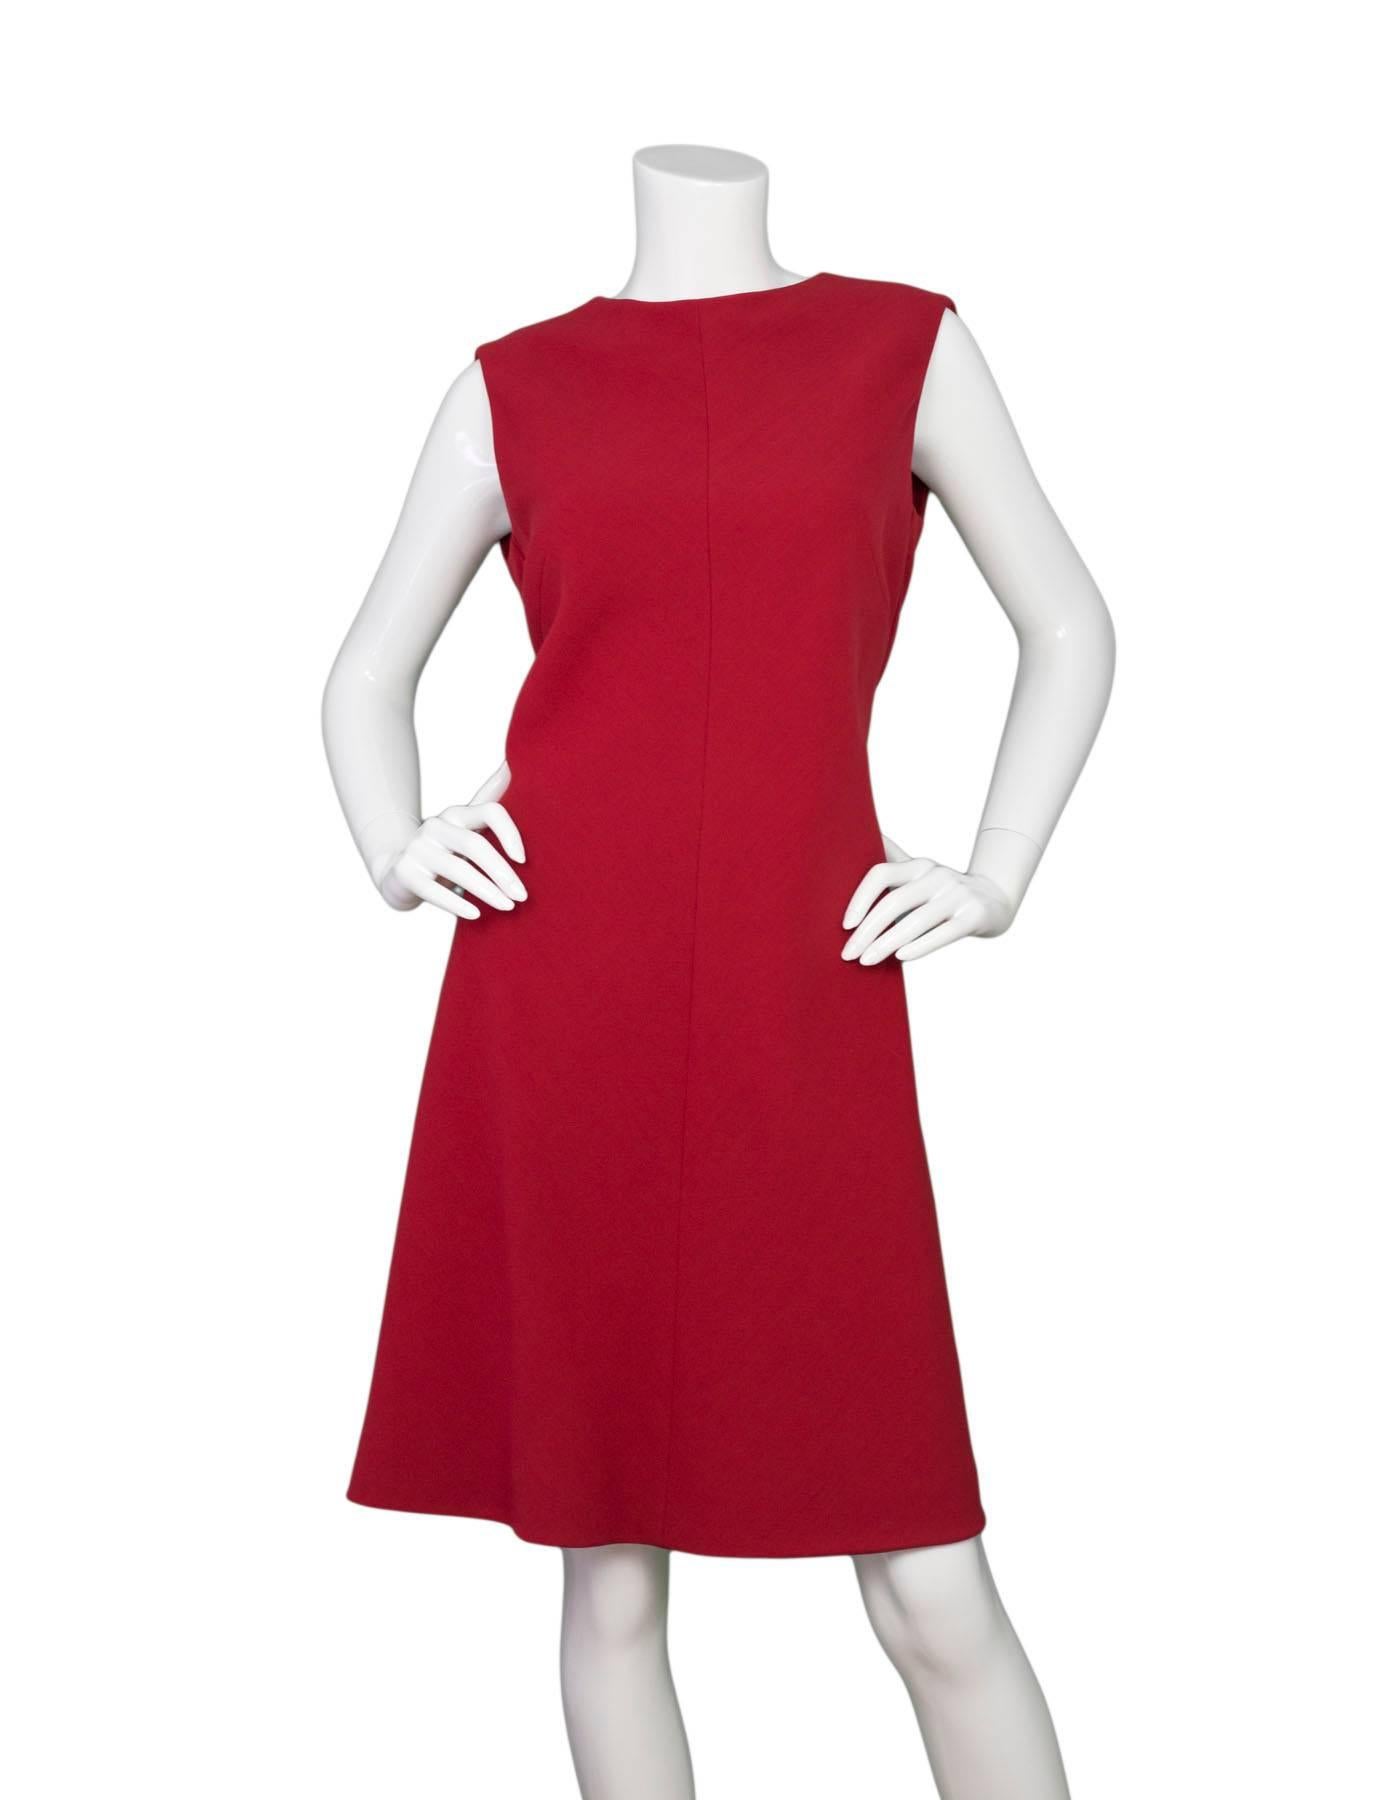 Giorgio Armani Red Wool Dress Sz IT46 NWT

Features pleating detail at back of skirt

Made In: Italy
Color: Red
Composition: 100% Wool
Lining: Red silk
Closure/Opening: Back zip closure
Retail Price: $2,295 + tax
Overall Condition: Excellent